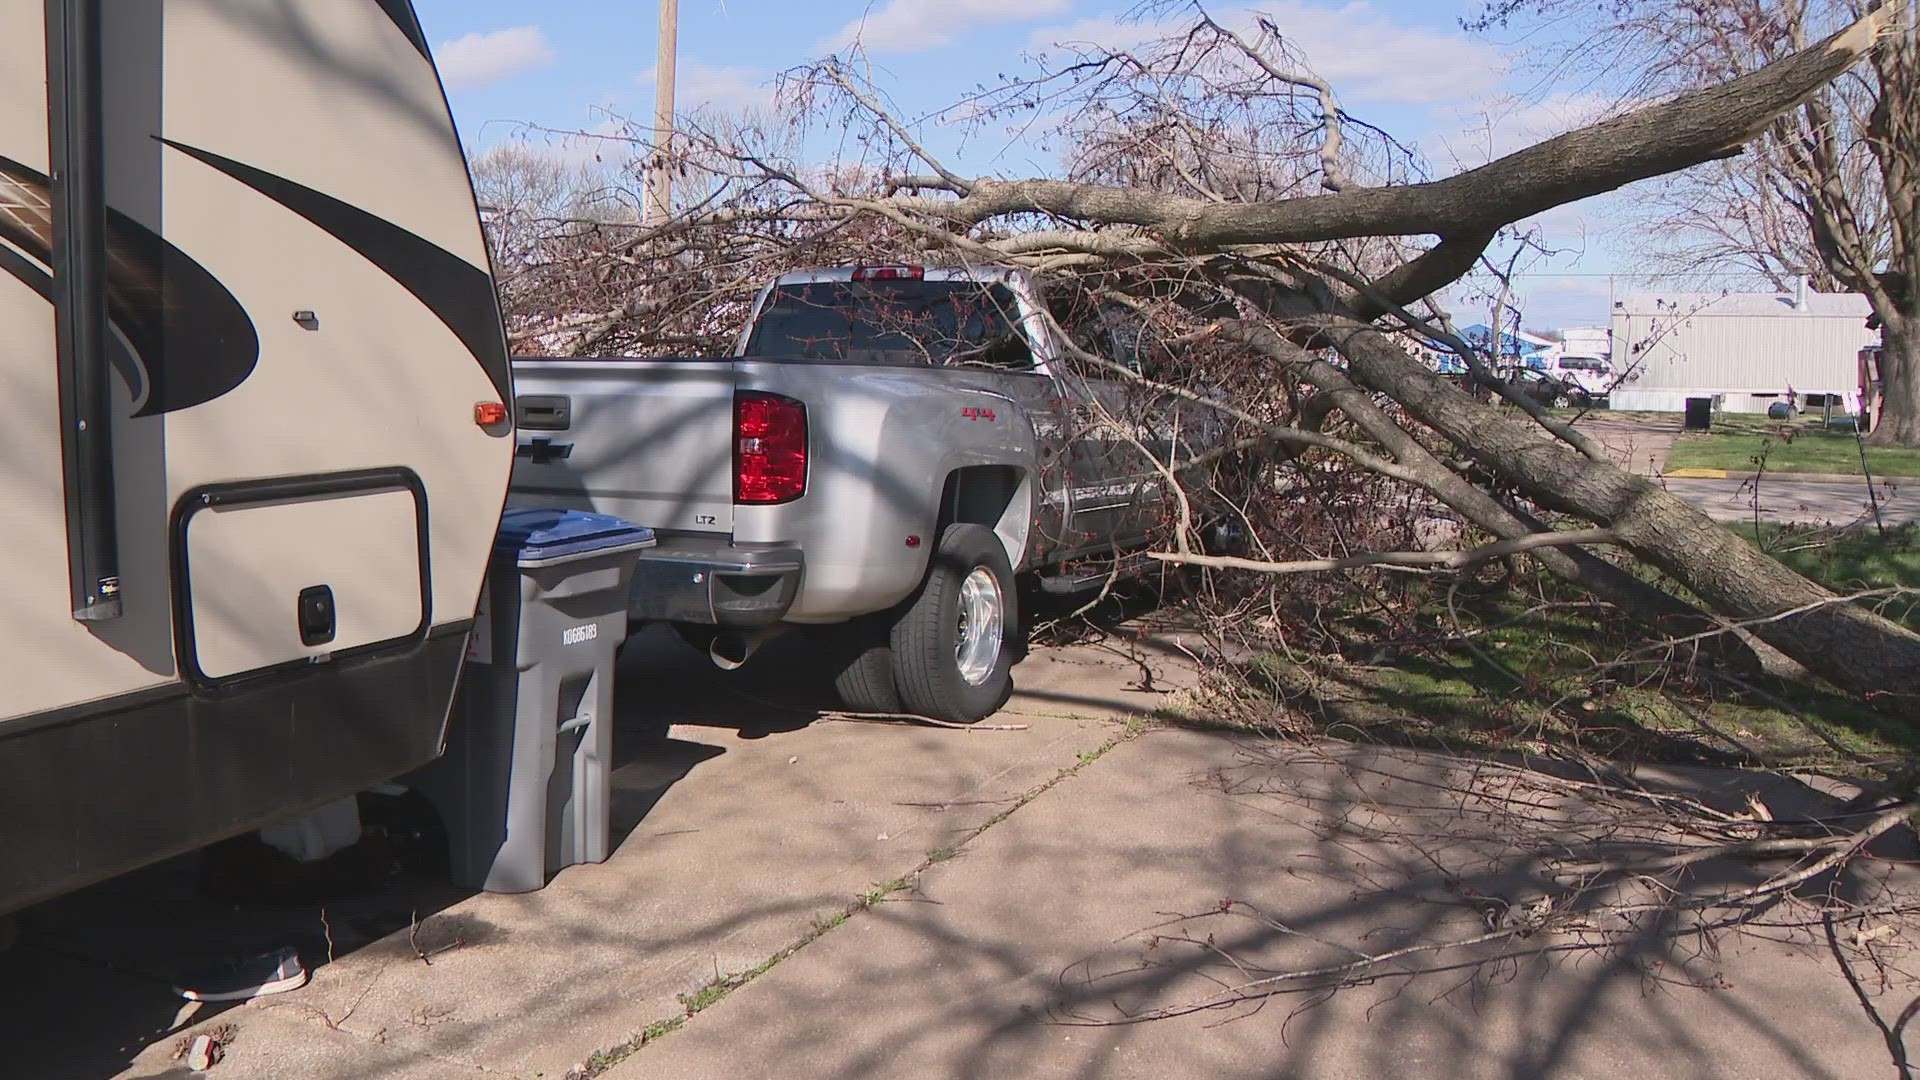 Severe storms on Friday impacted several states including Illinois. Most of the homes in Bethalto’s Kickapoo Village sustained some sort of damage.